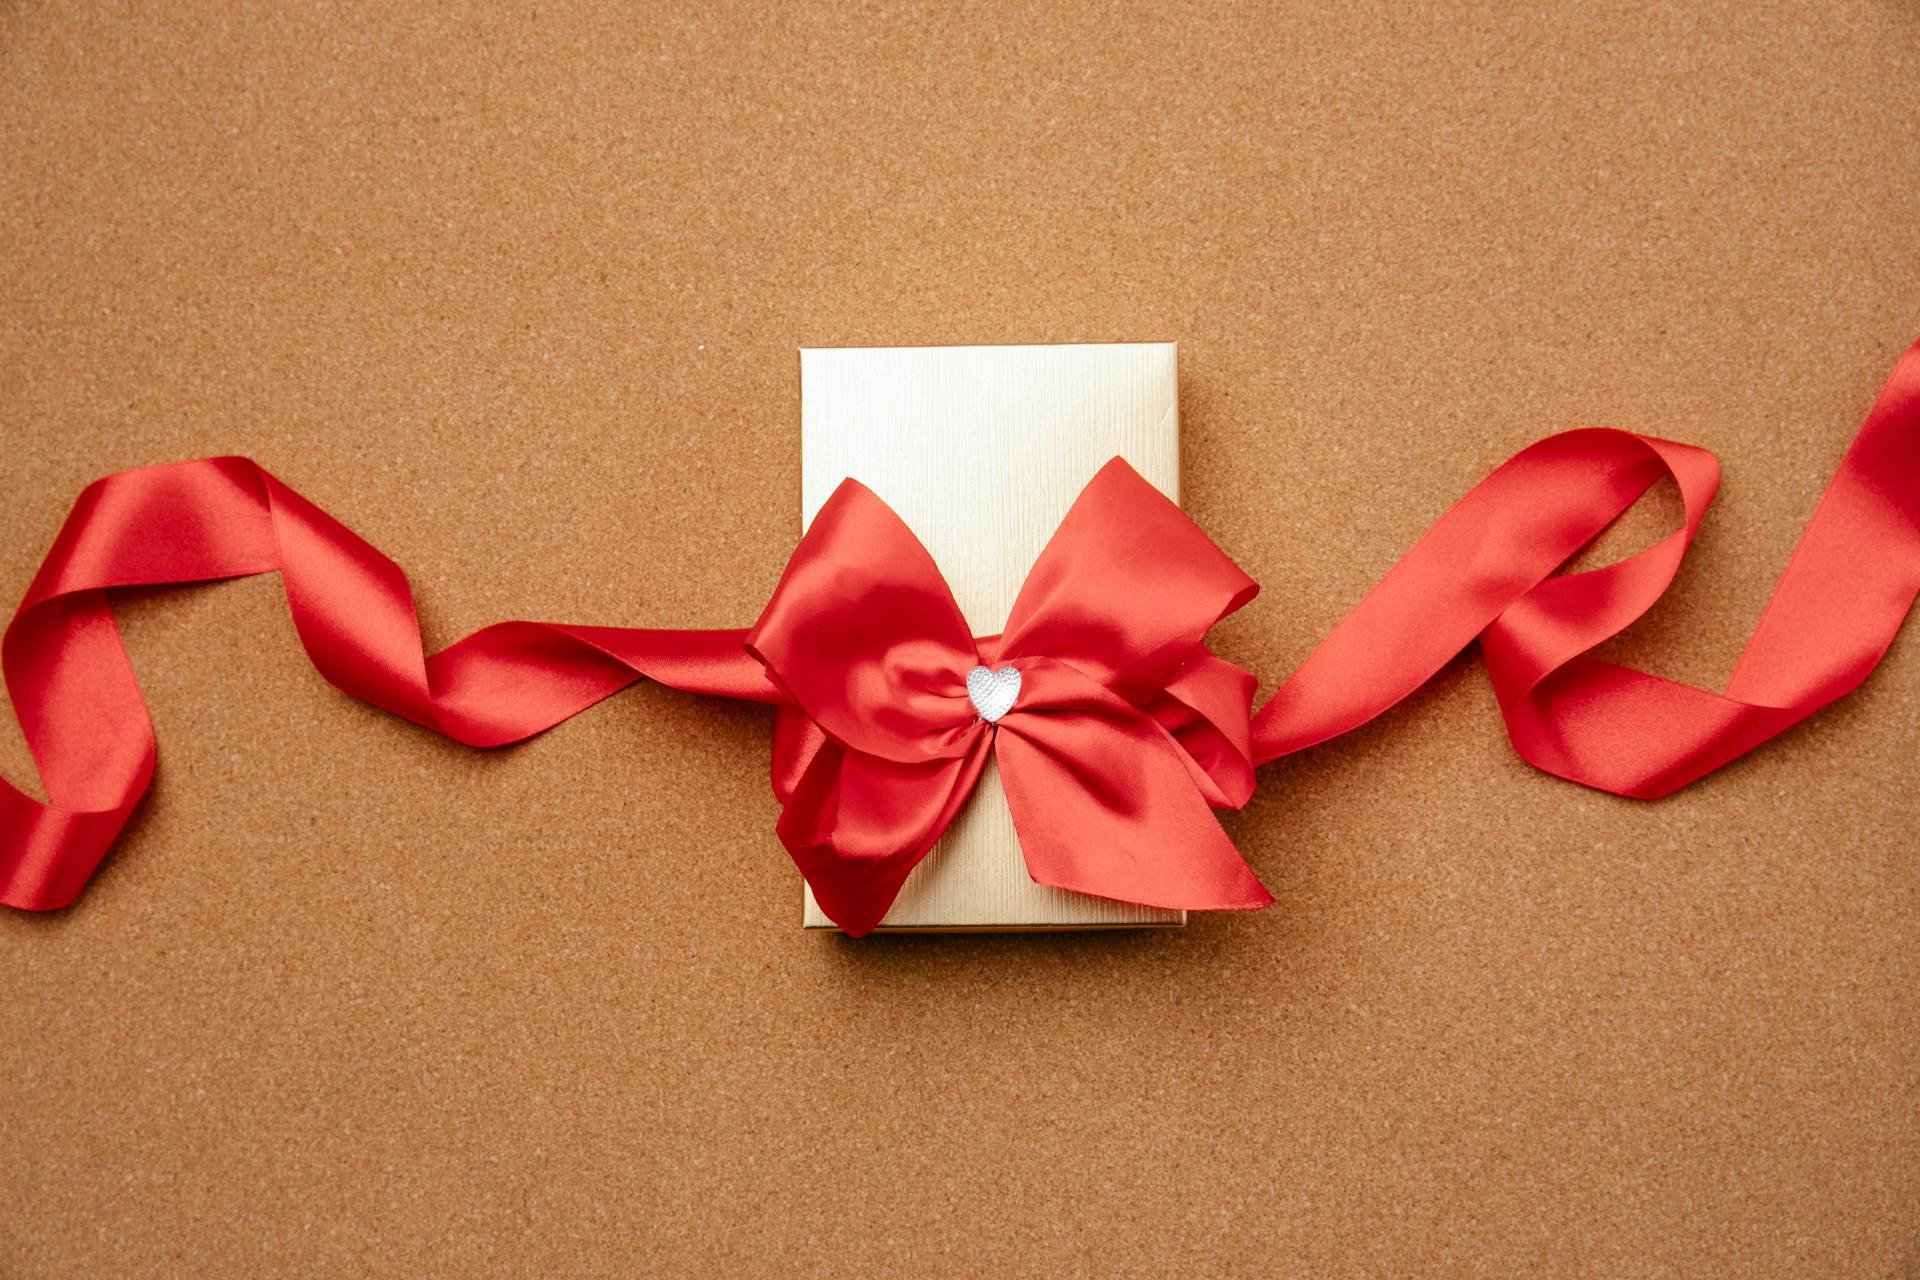 A small gift box decorated with a red ribbon | Source: Pexels